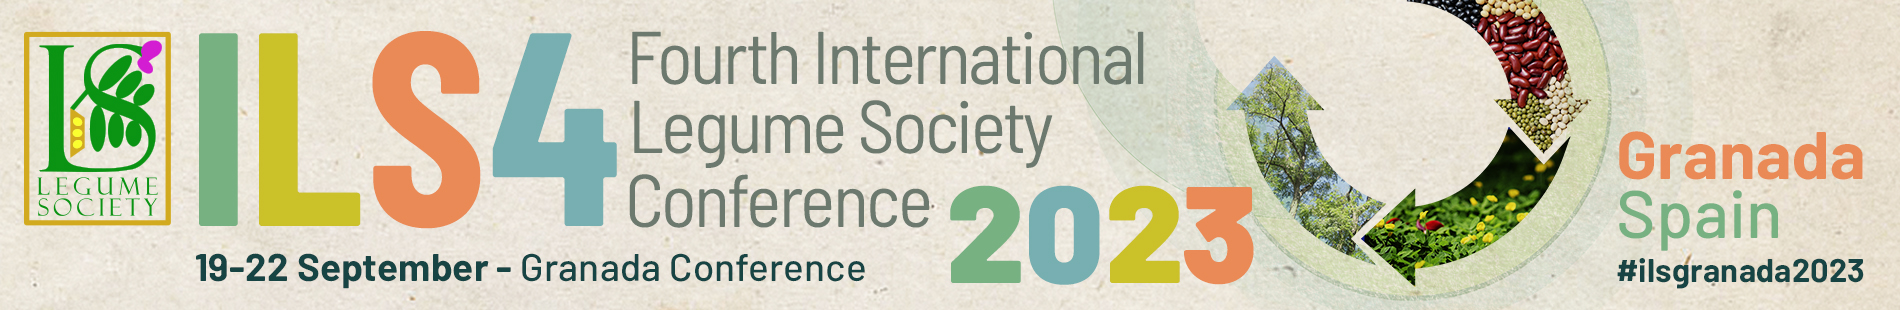 4th International Legume Society Conference, which will be held between the 18th and 21st of October 2023